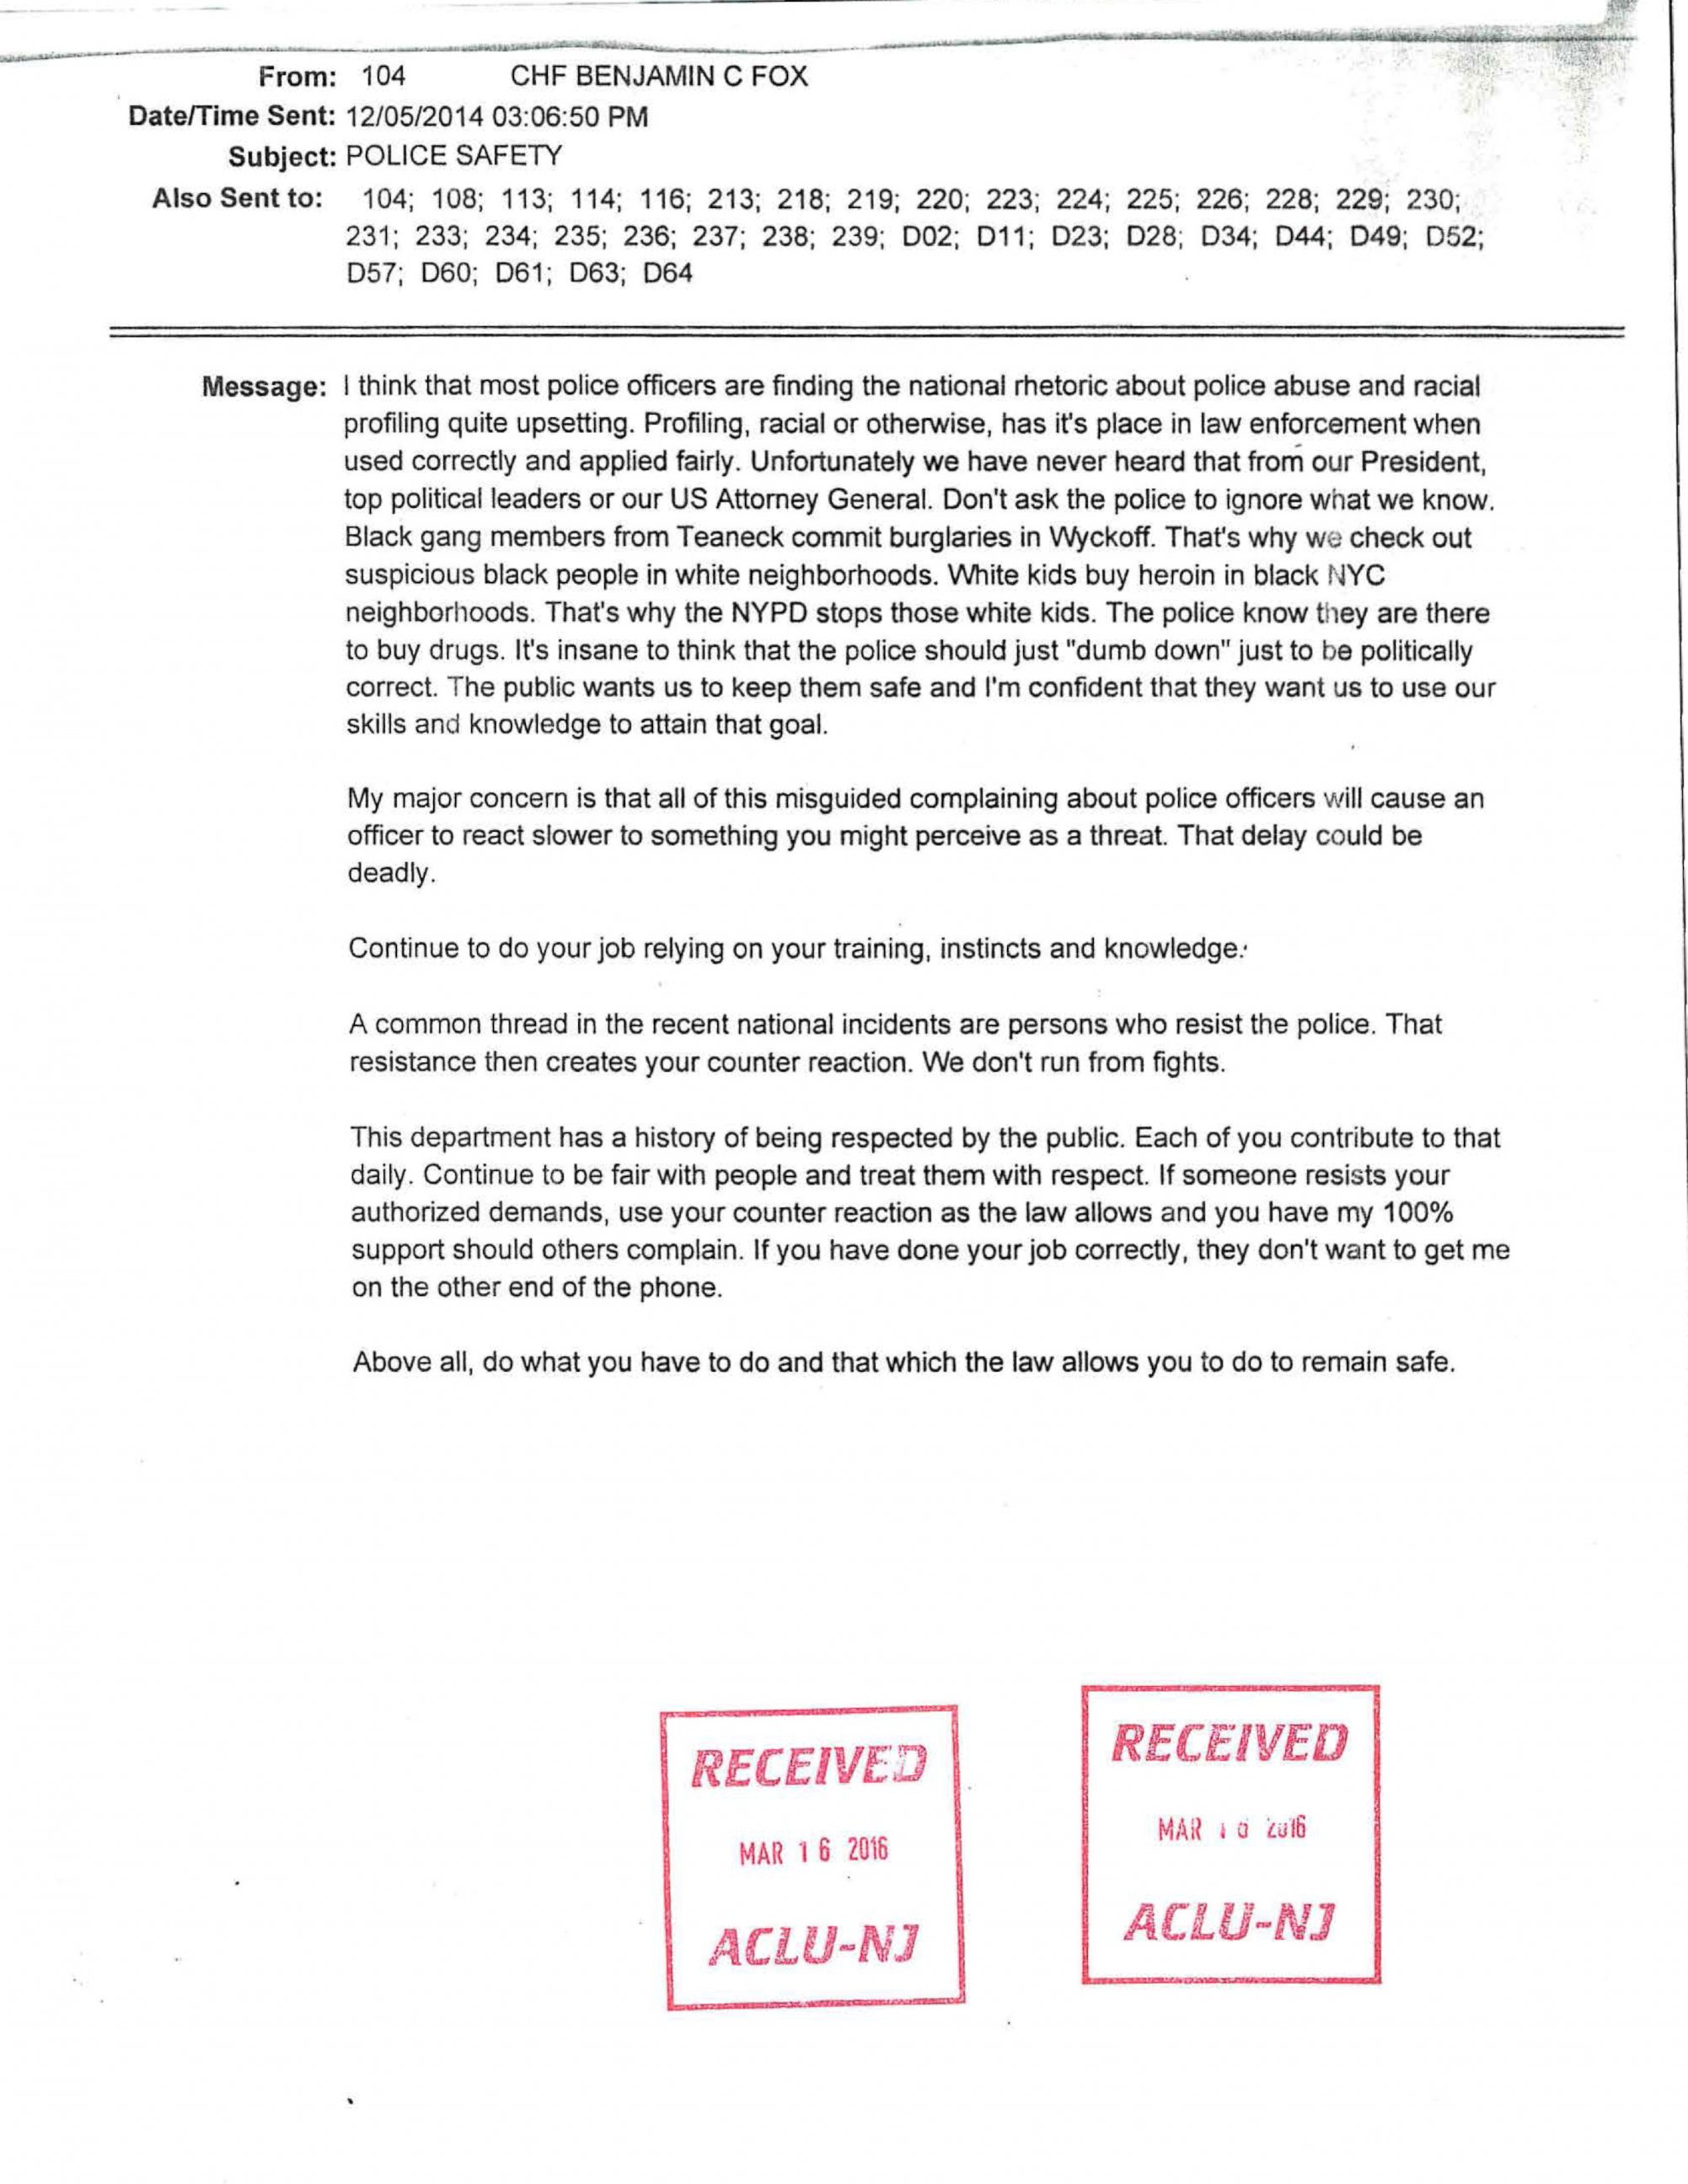 PHOTO: In an excerpt seen here, The ACLU of New Jersey asked the state AG to investigate Wyckoff Police Department Chief Benjamin Fox after it released an email he allegedly wrote defending racial profiling.